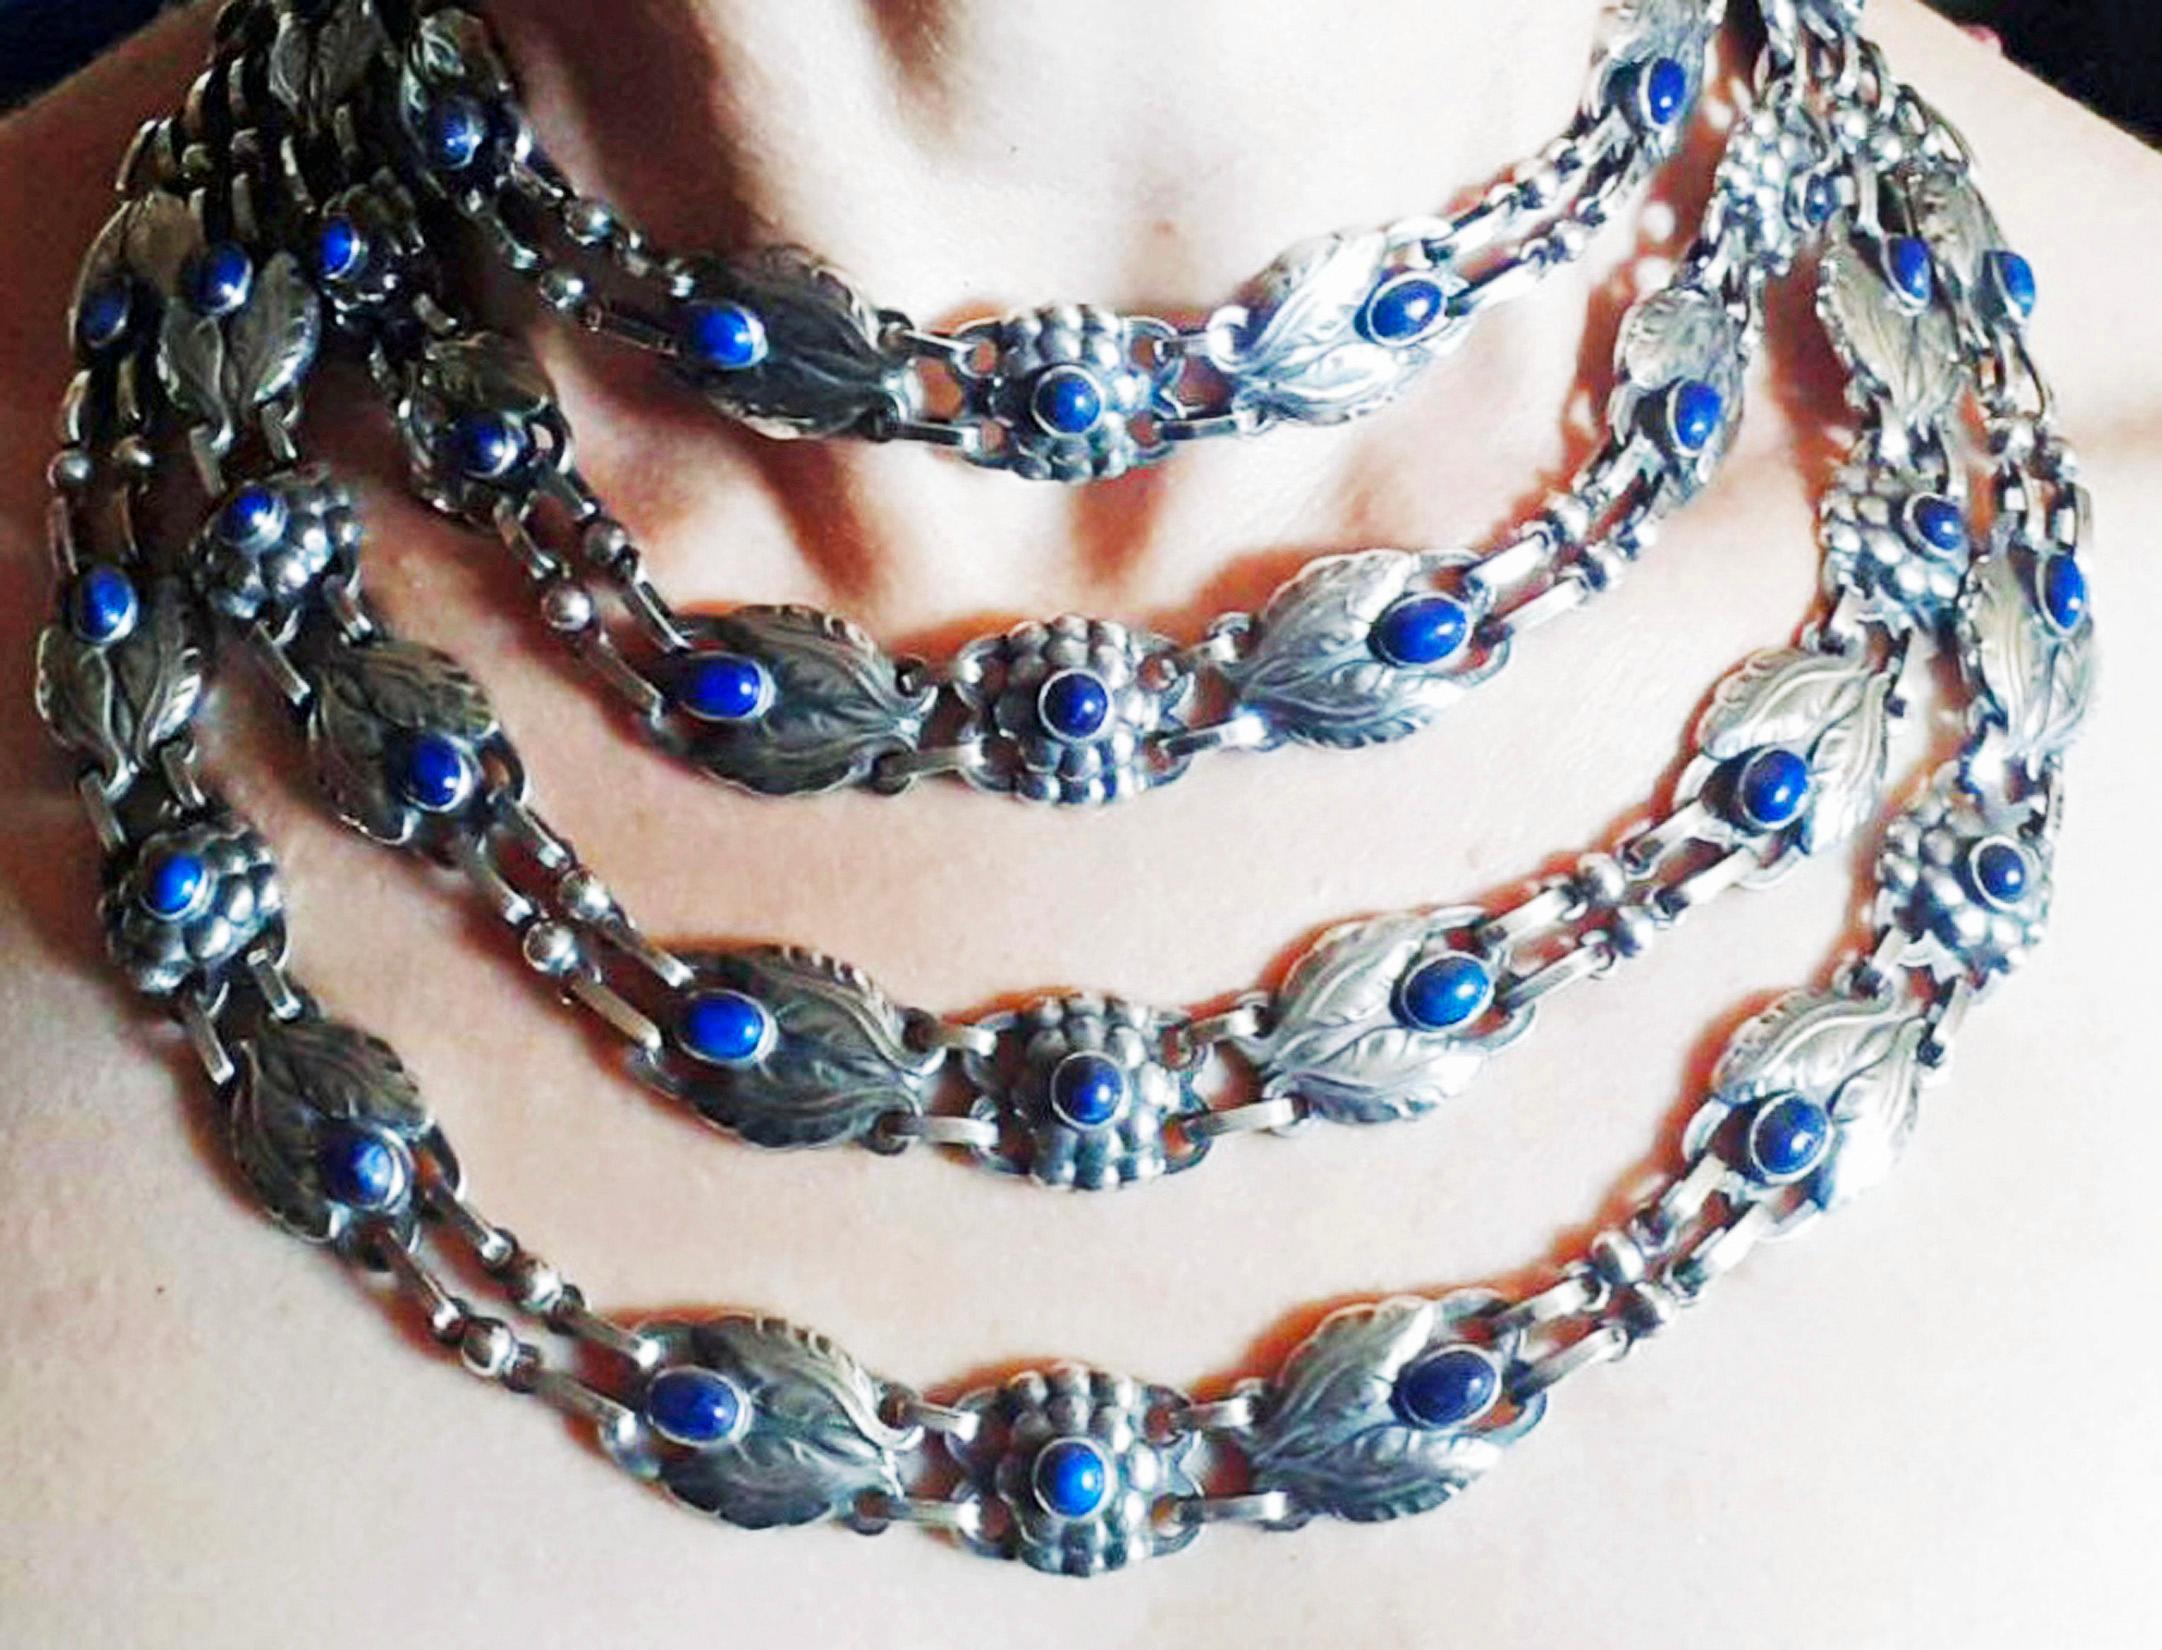 Georg Jensen 4 strand Lapis and Sterling Silver Necklace C.1933 In Good Condition For Sale In Toronto, ON